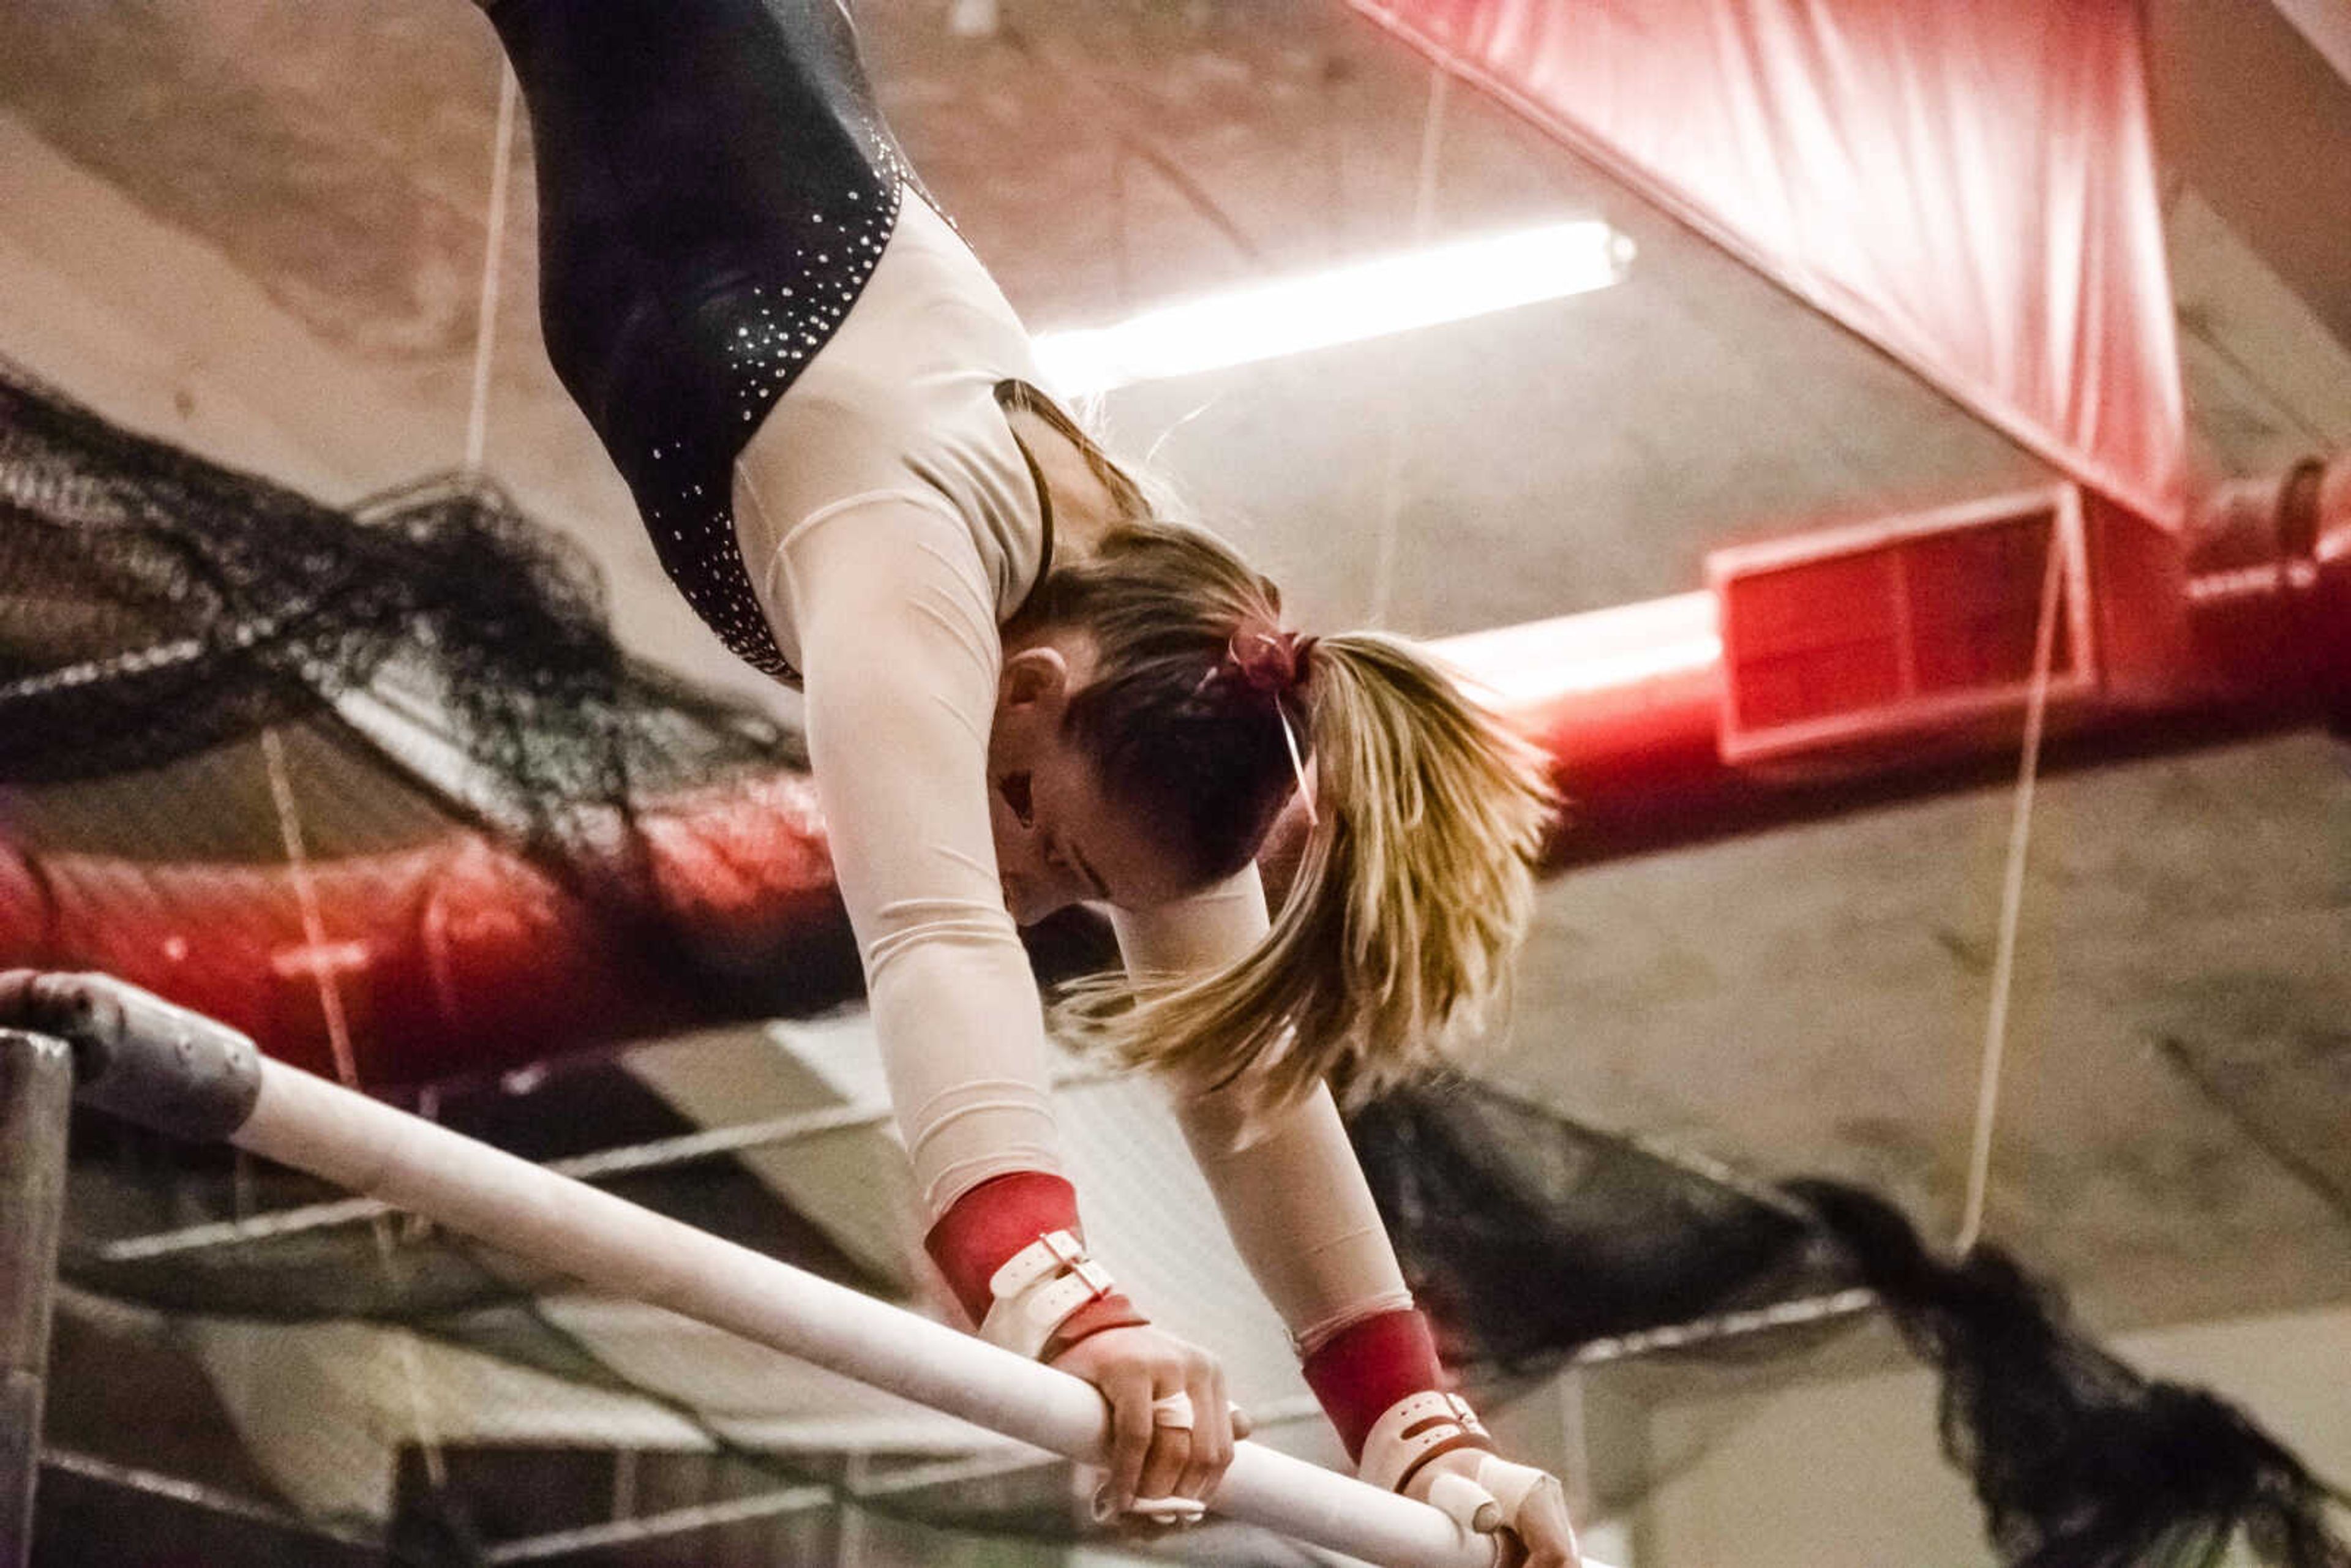 Junior Mackenzie Slee performs her routine on the uneven bars at Houck Field House on Jan. 18, where she finished with a score of 8.725, placing 11th in the event and fifth among Redhawks.